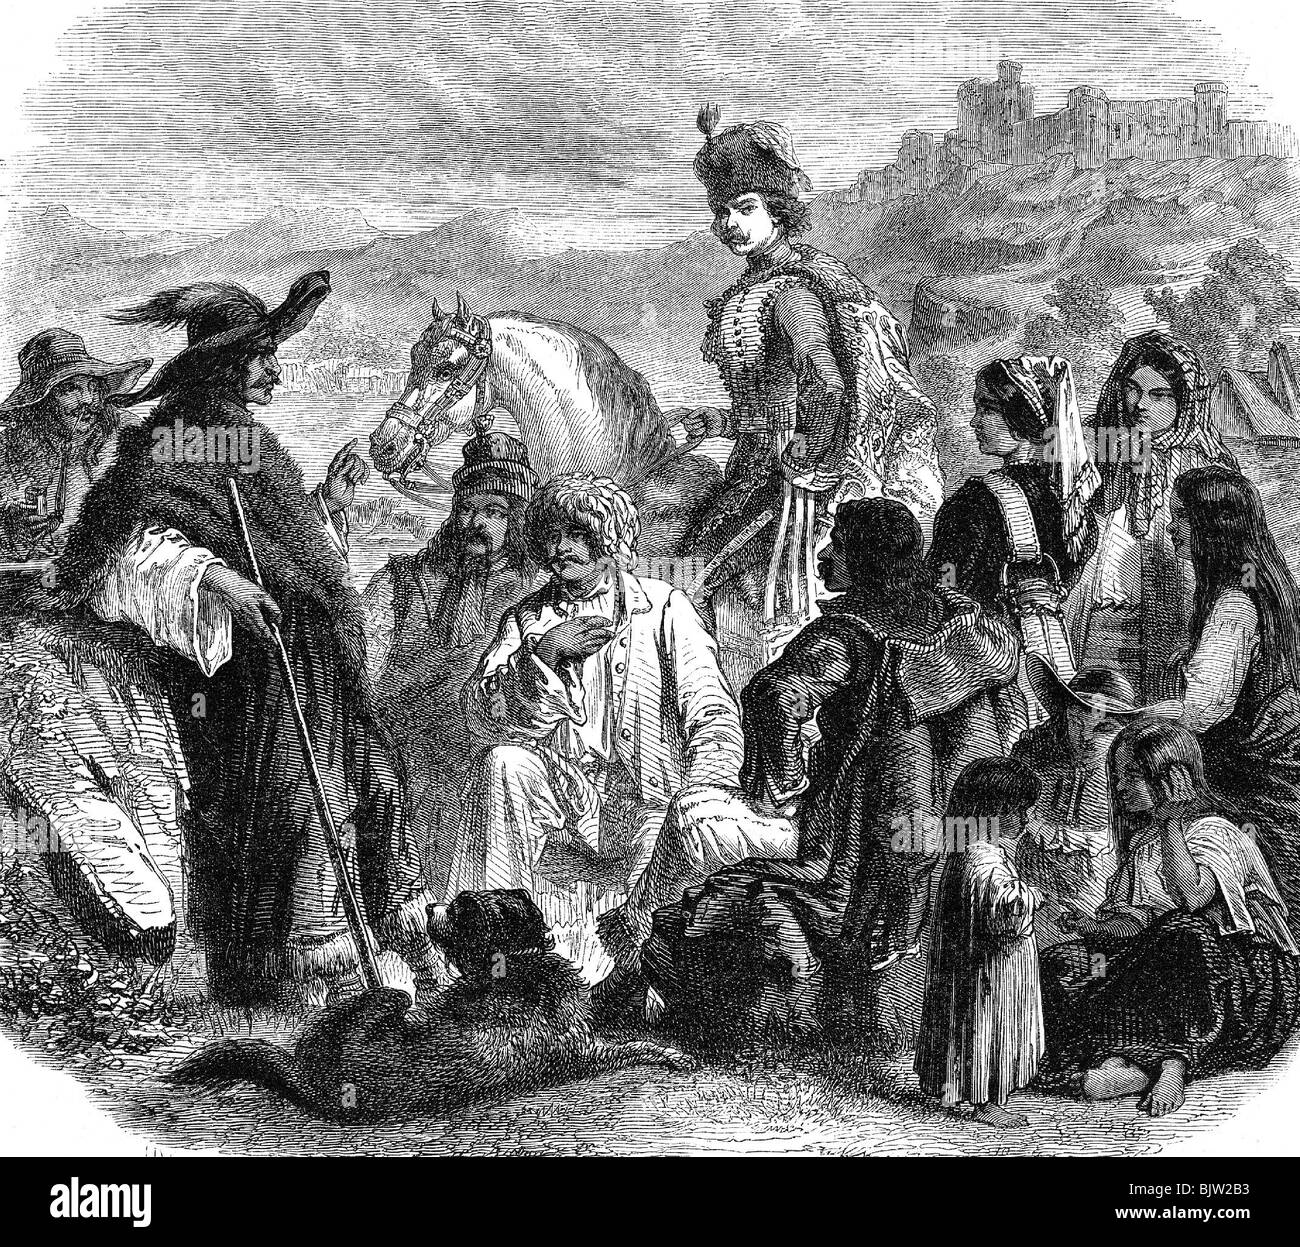 geography / travel, Hungary, people, different types: hussar, herdsman, farmer, gipsy, wood engraving, 19th century, historic, historical, gypsy, zingaro, gypsies, gipsy woman, gypsy woman, zingara, herder, herdsmen, herders, soldier, uniform, horse, riding, rider, hat, stick, children, dog, women, man, men, traditional costume, national costume, dress, traditional costumes, national costumes, dresses, Eastern Europe, Central Europe, Stock Photo